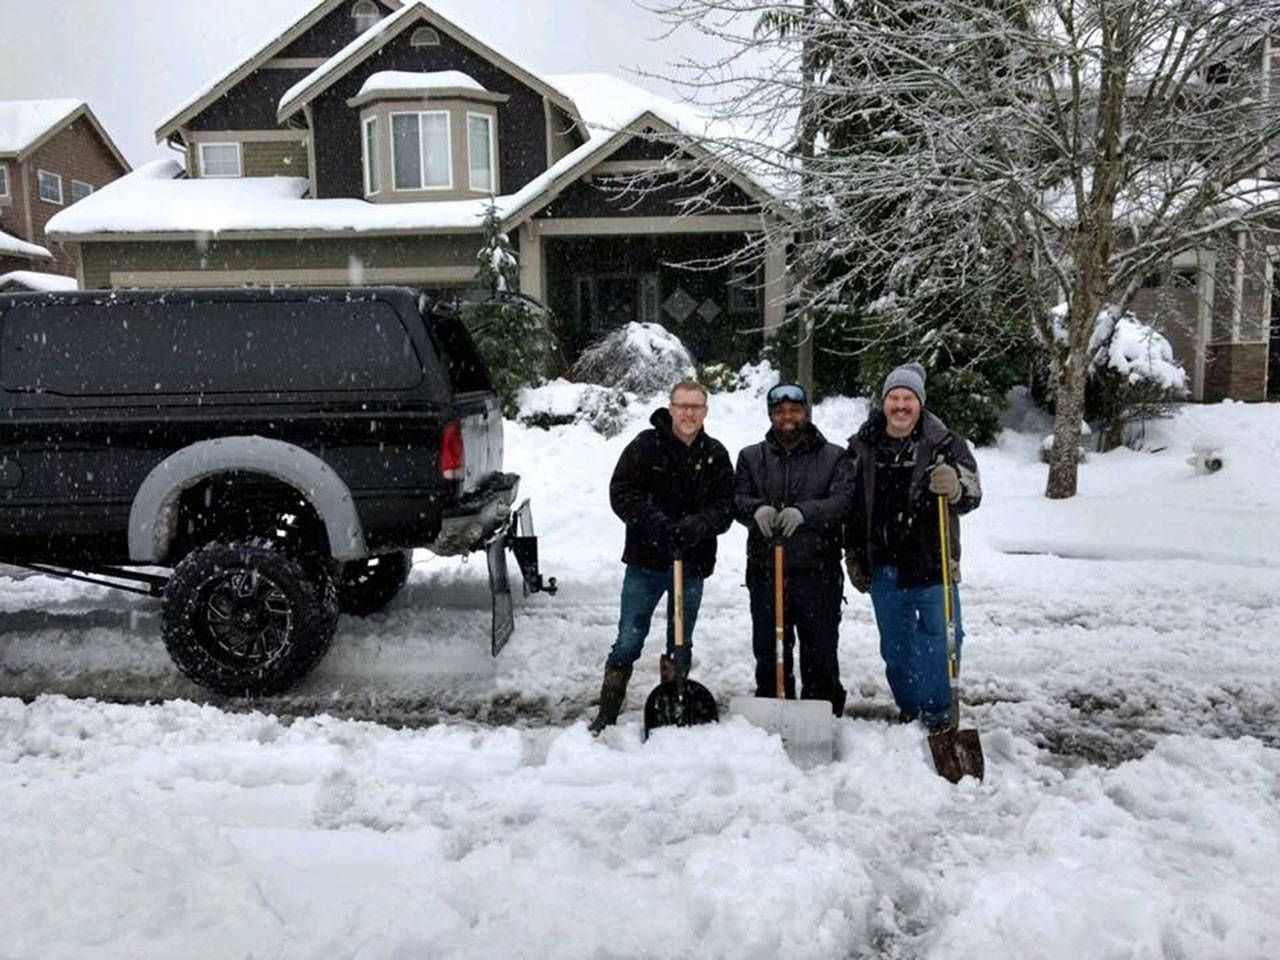 During the recent snow, these three neighbors roamed Valley Meadows looking for people who were stuck in the snow. When William Peterson’s car was snuck in the snow, he said they jumped right out of their truck and started shoveling his car out. Submitted photo from William Peterson